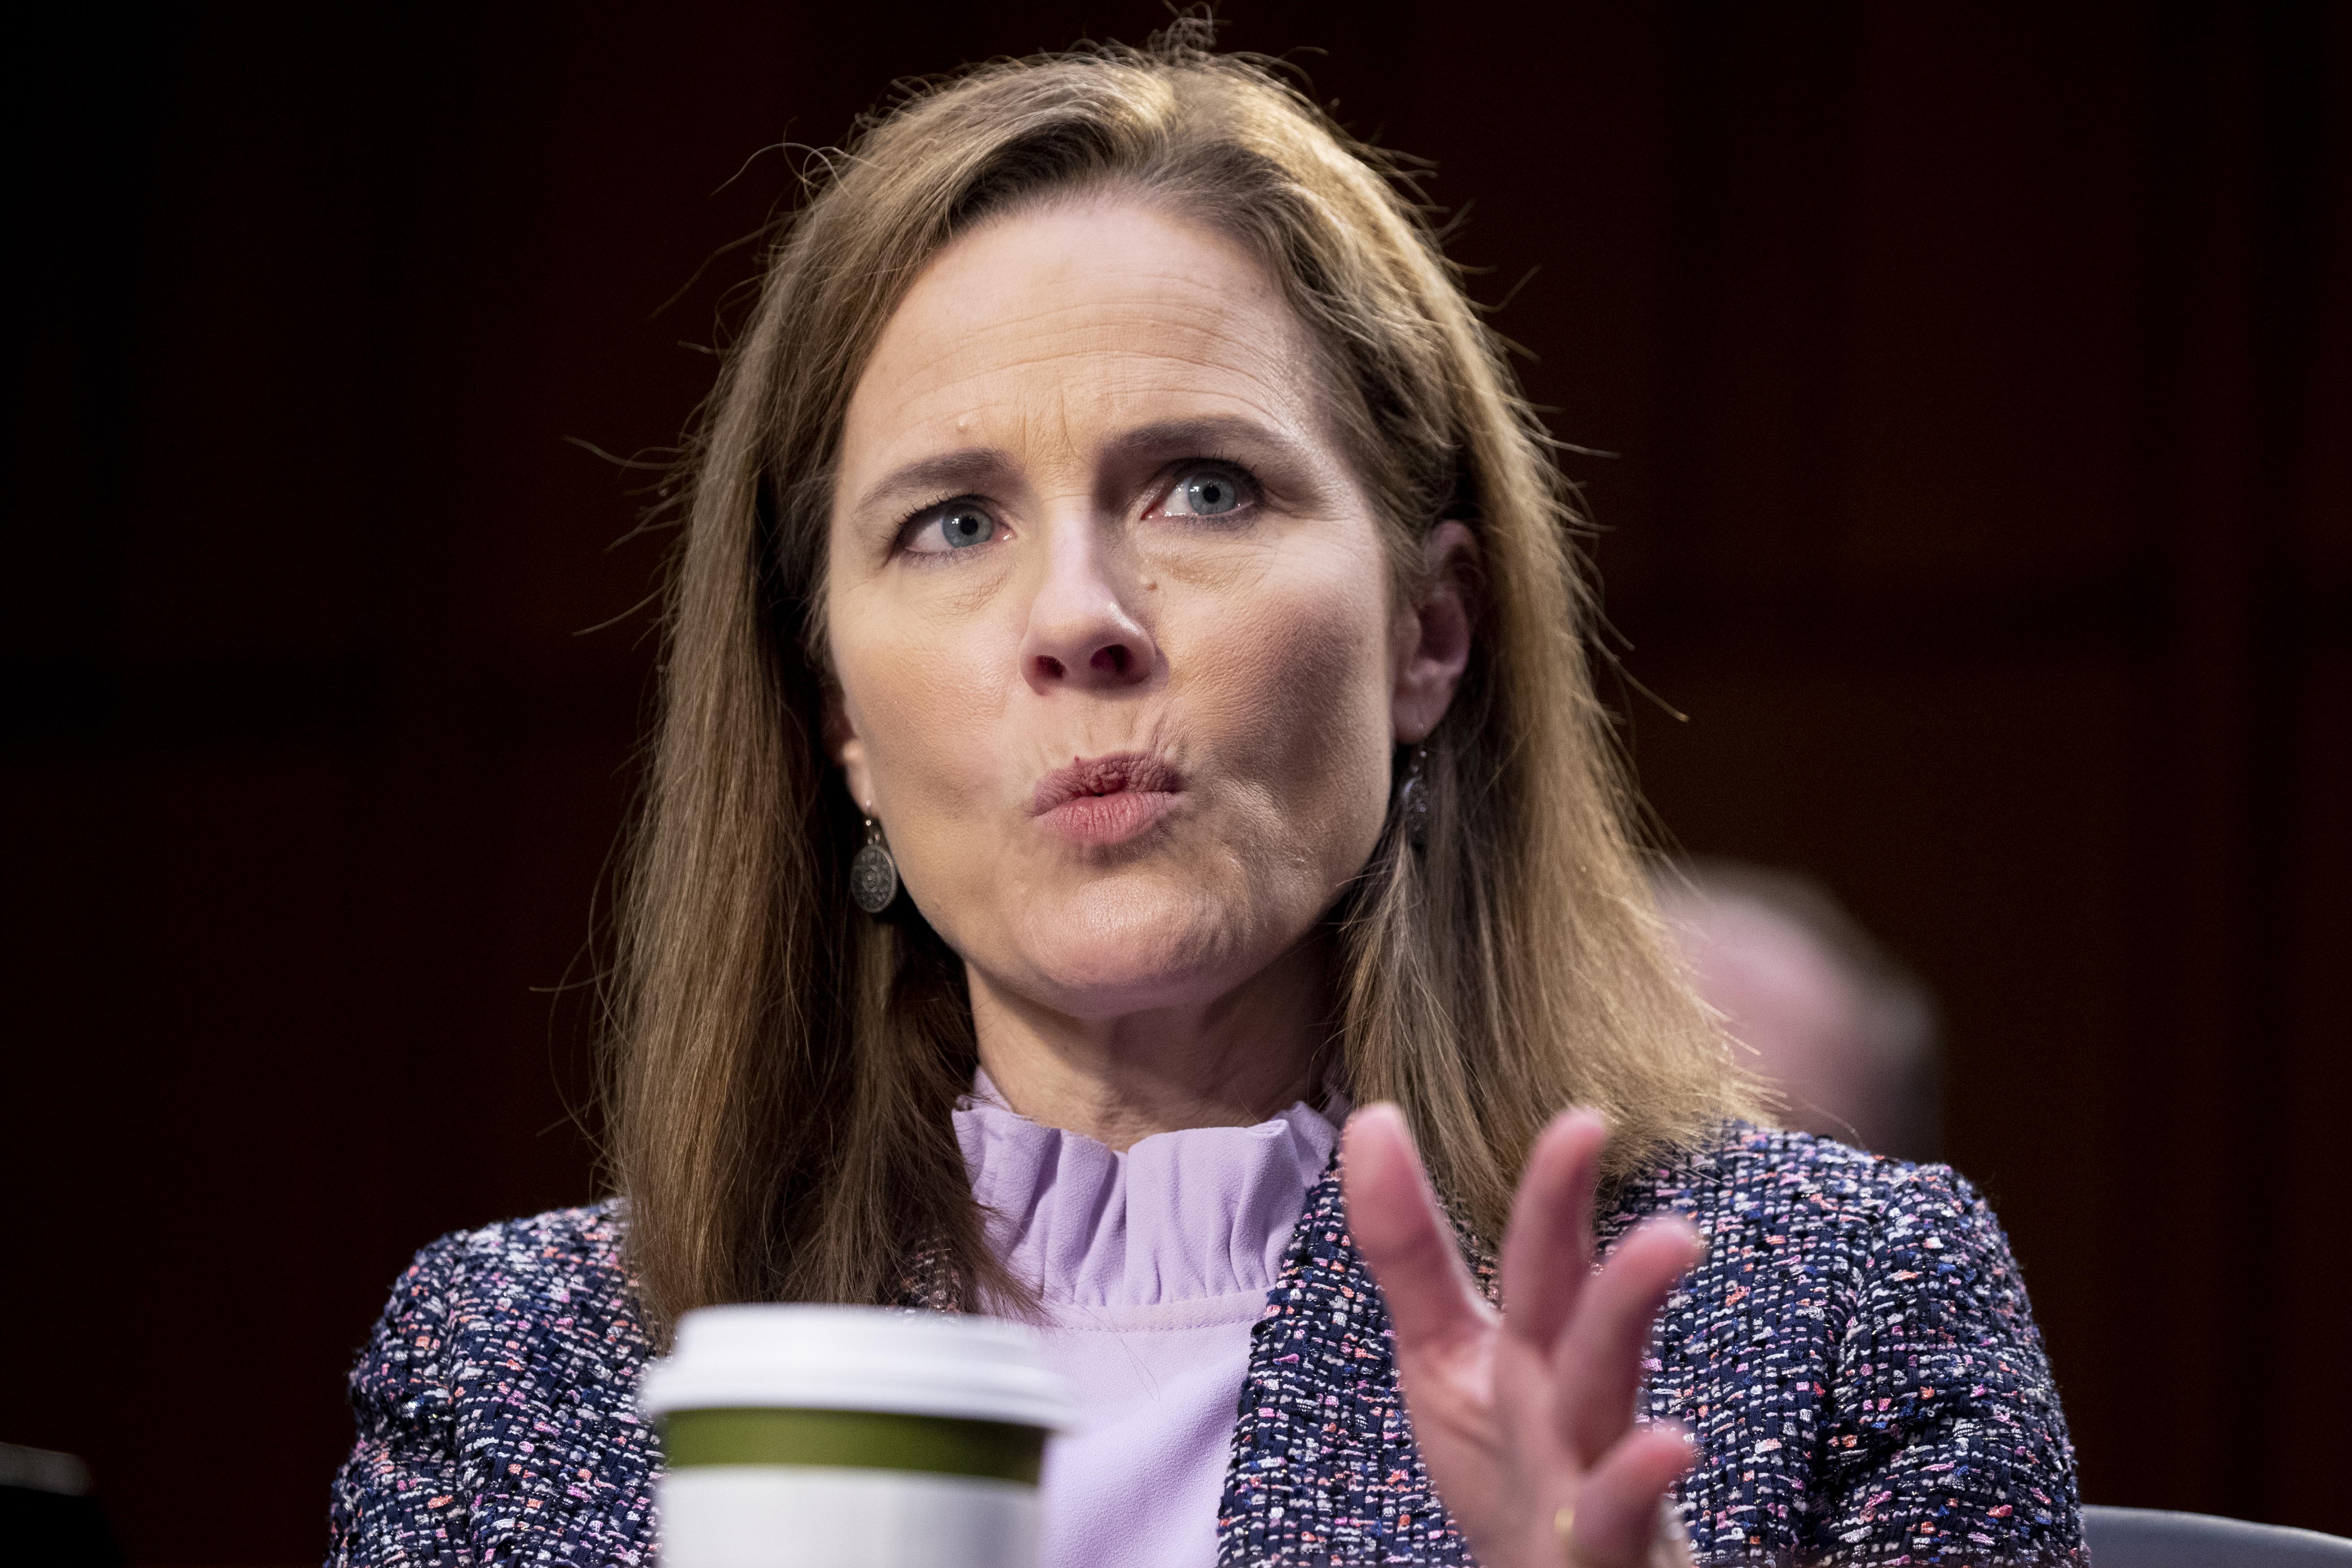 Amy Coney Barrett speaks while gesturing. A coffee cup can be seen in front of her.